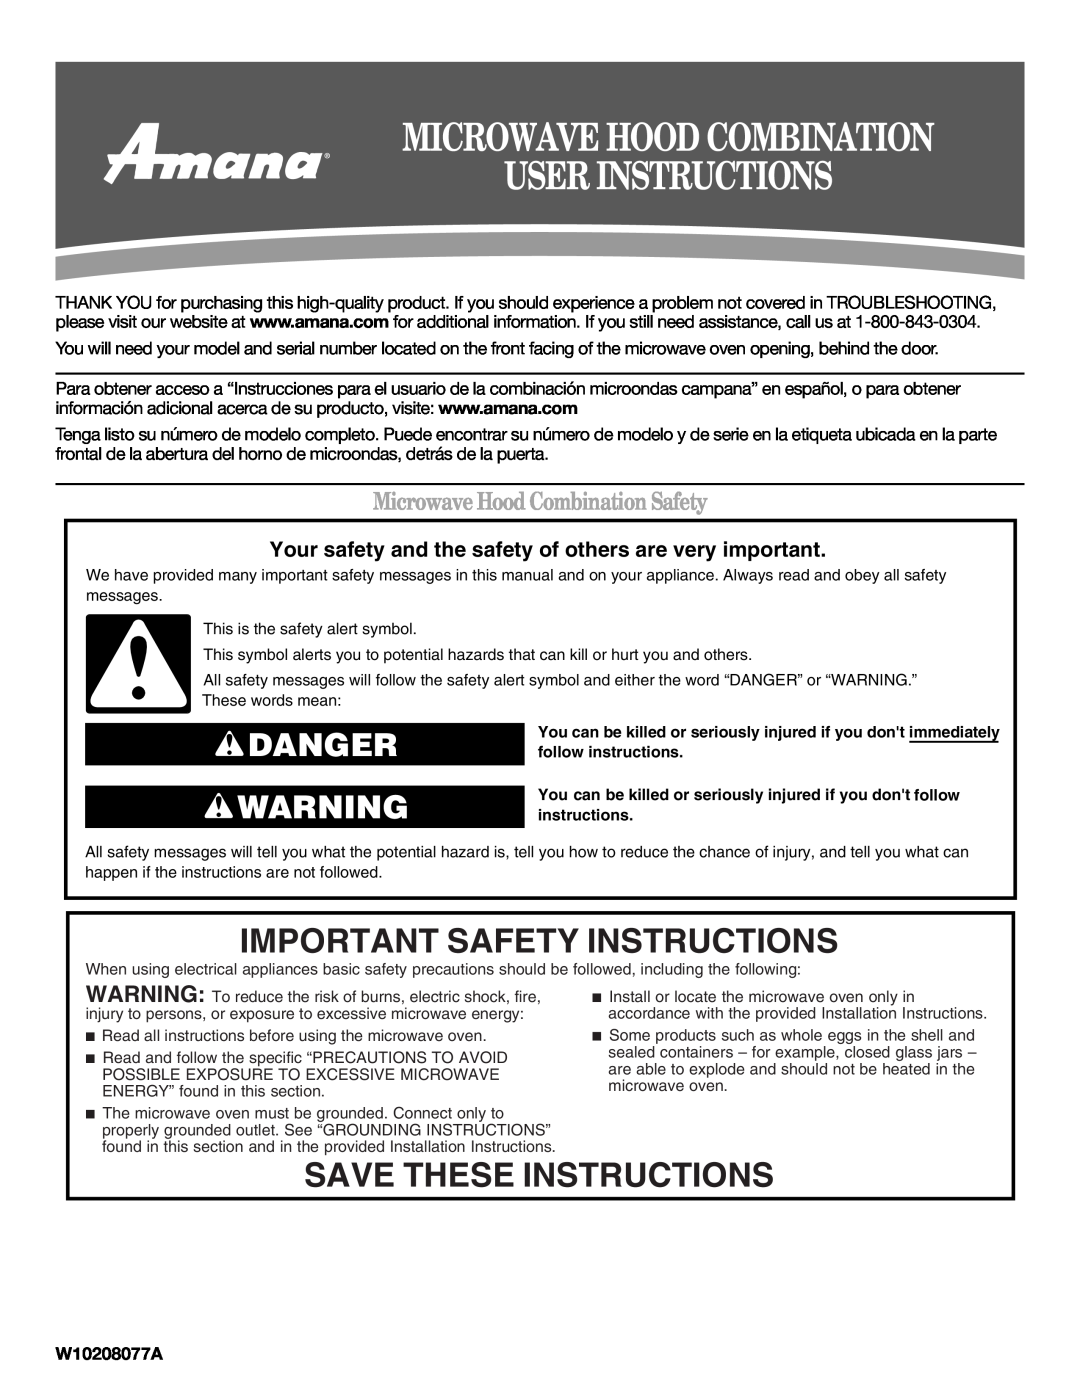 Amana W10208081A important safety instructions Important Safety Instructions, Save These Instructions, W10208077A, Danger 